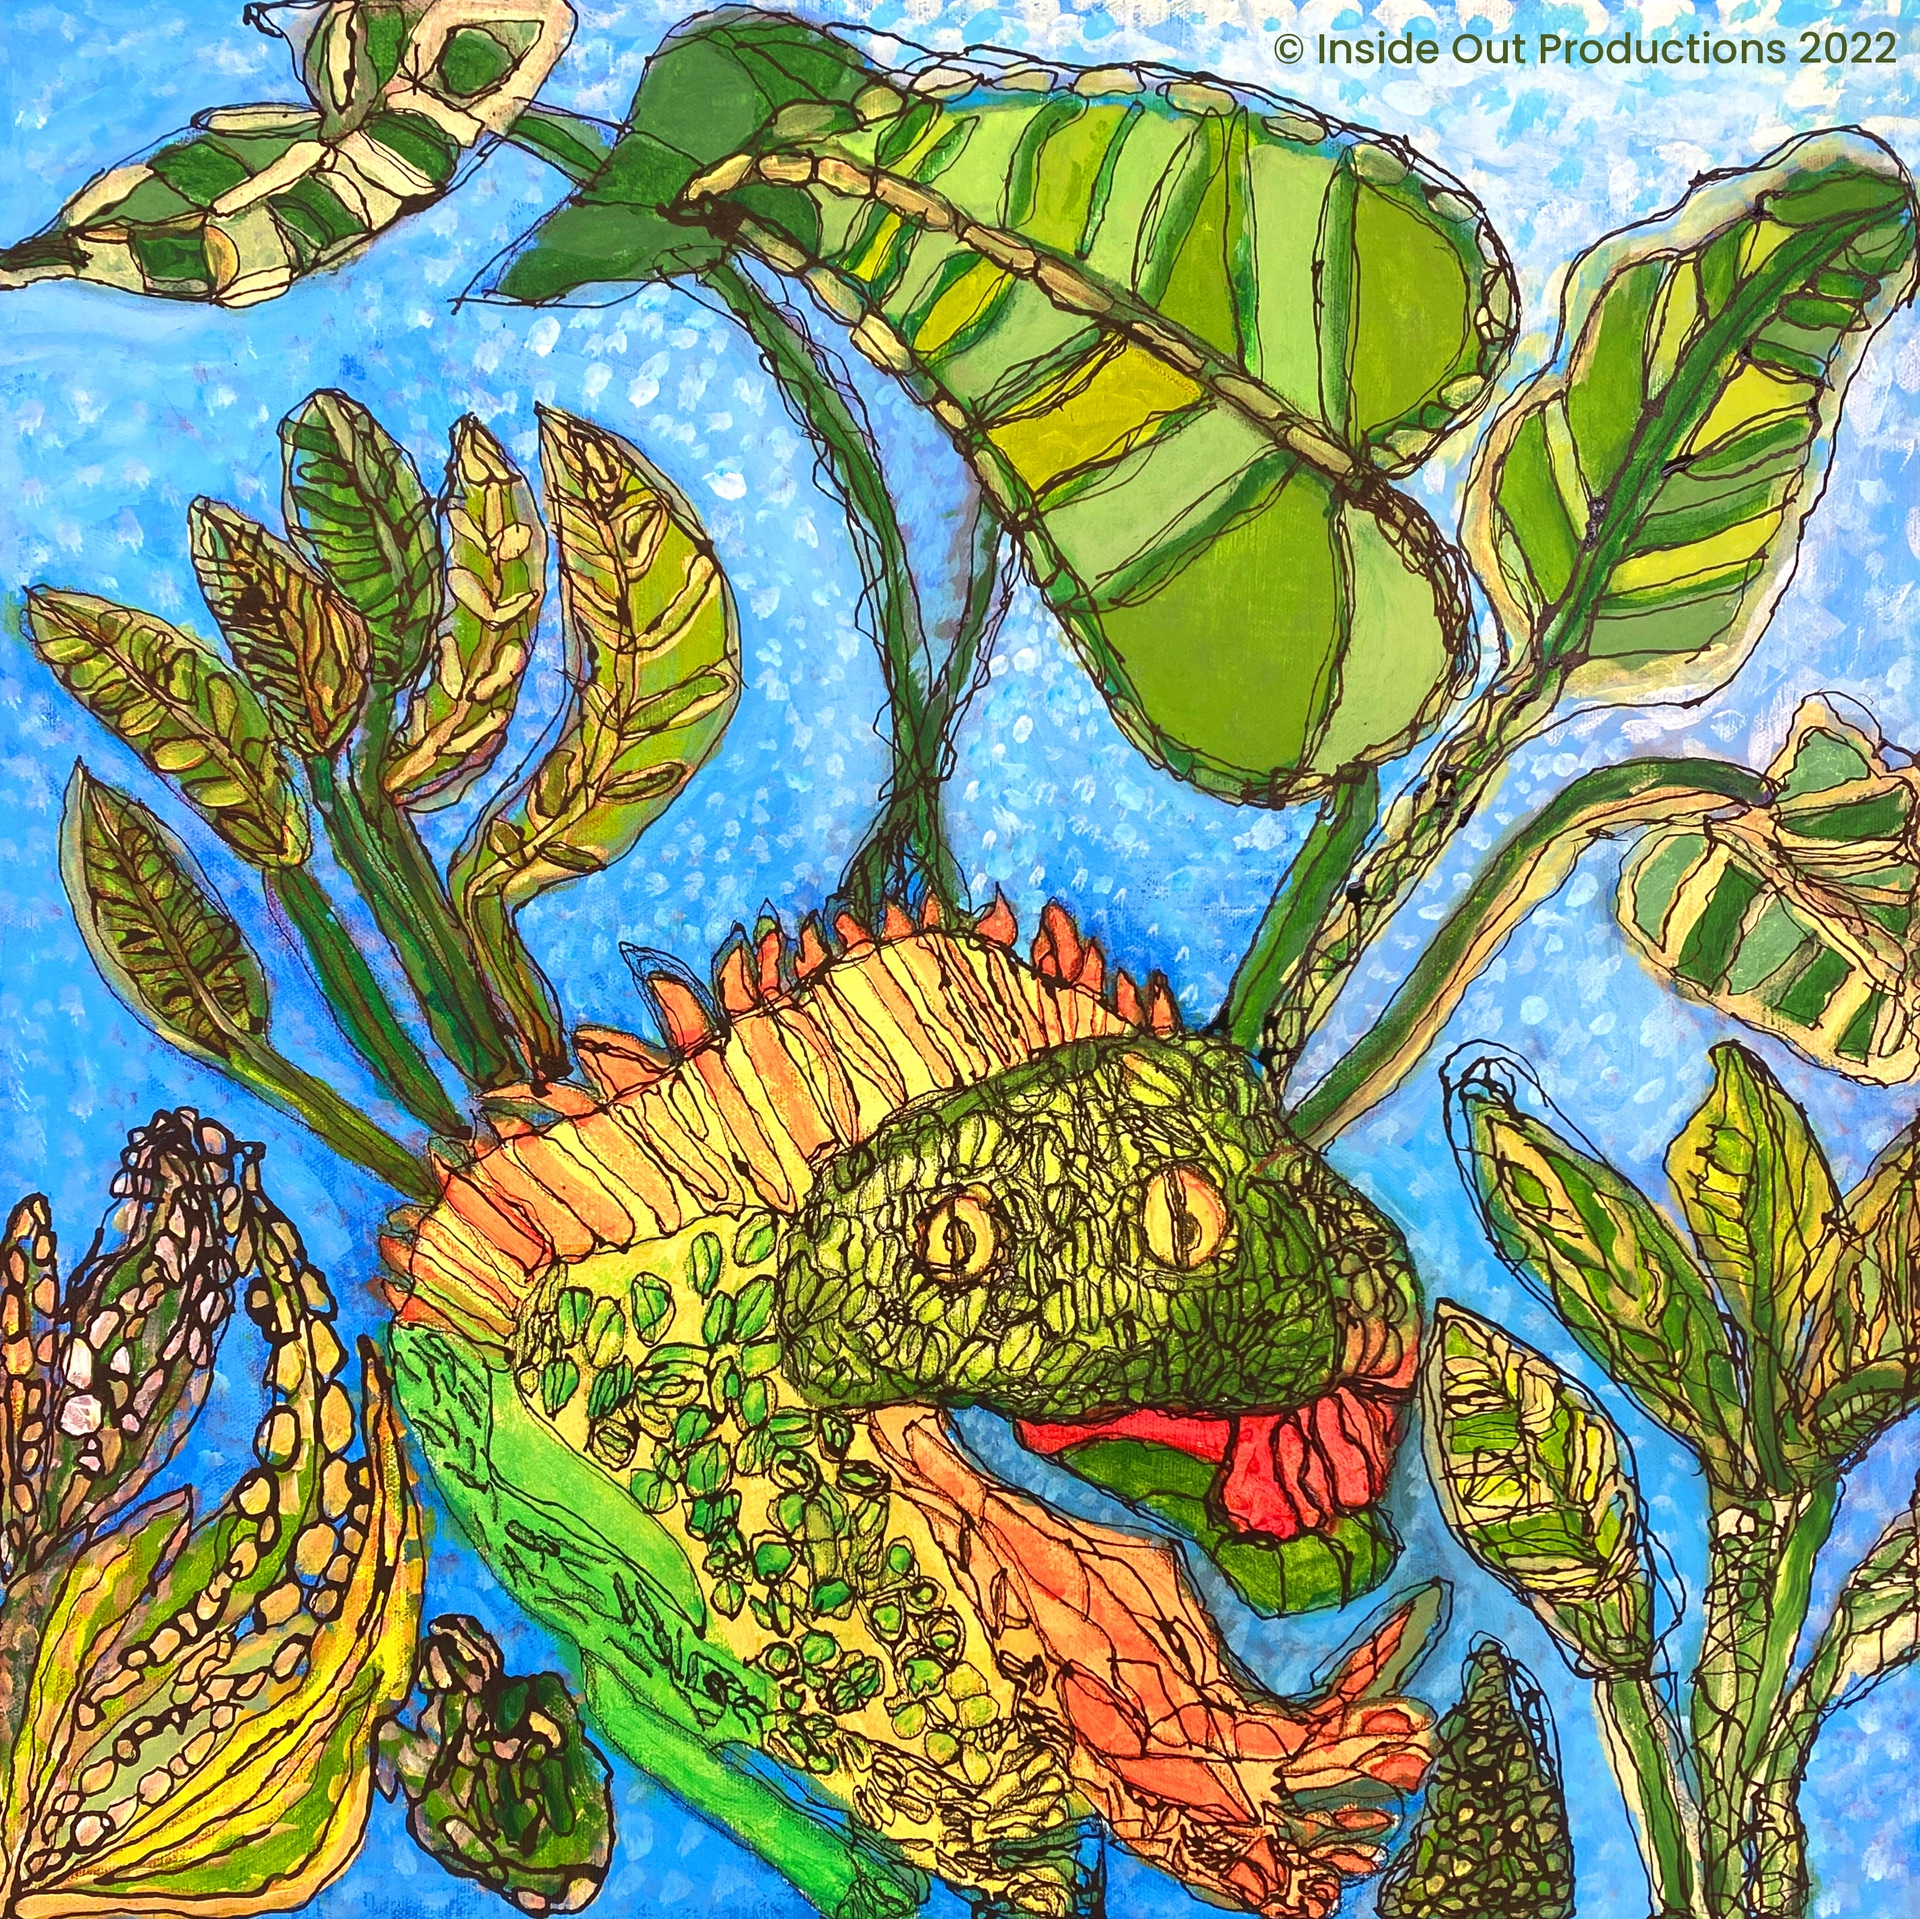 Acrylic paint and black ink depicts leaves and botanical shapes of various greens and yellows. They appear to be growing upwards against a blue background. In the center, there is a reptilian creature that is camouflaged with the plants around it.